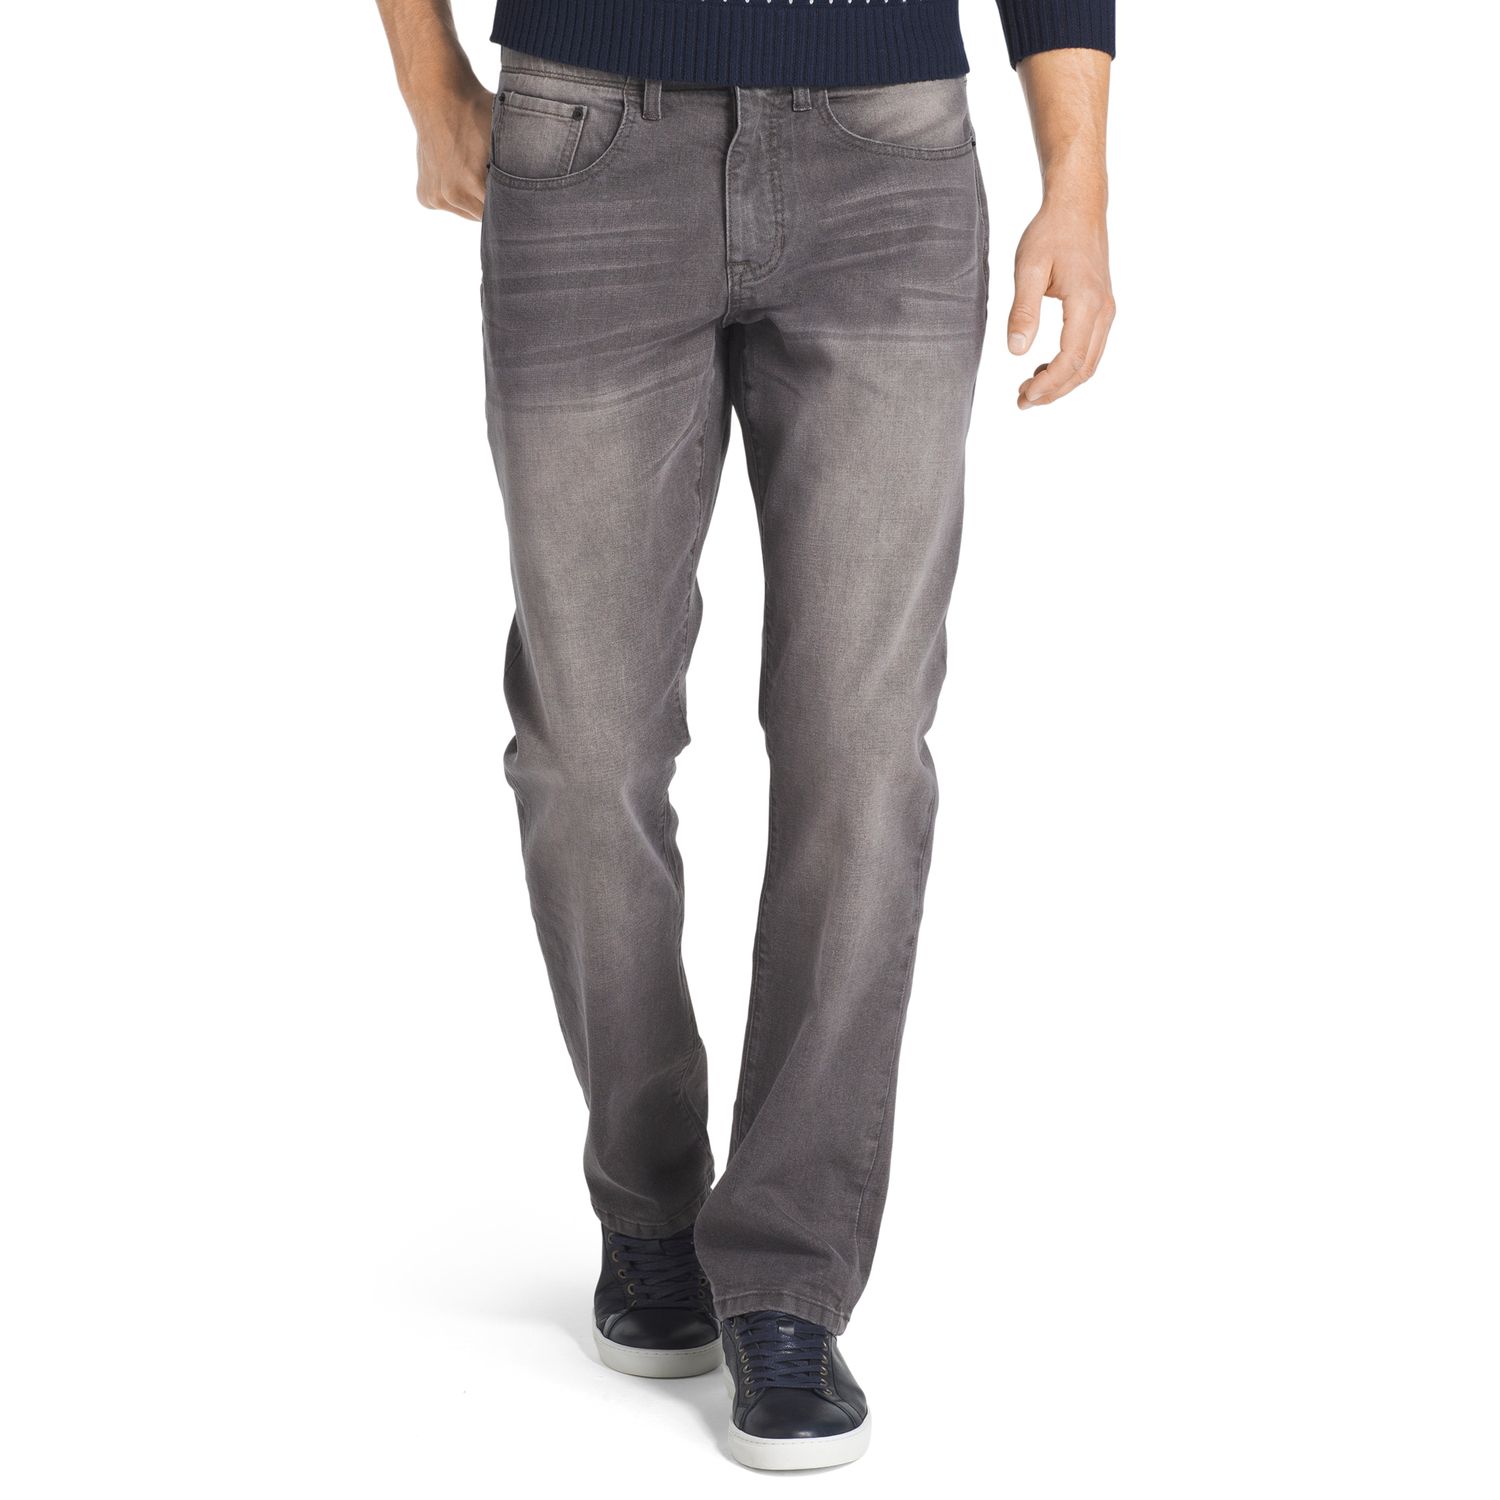 izod athletic fit jeans